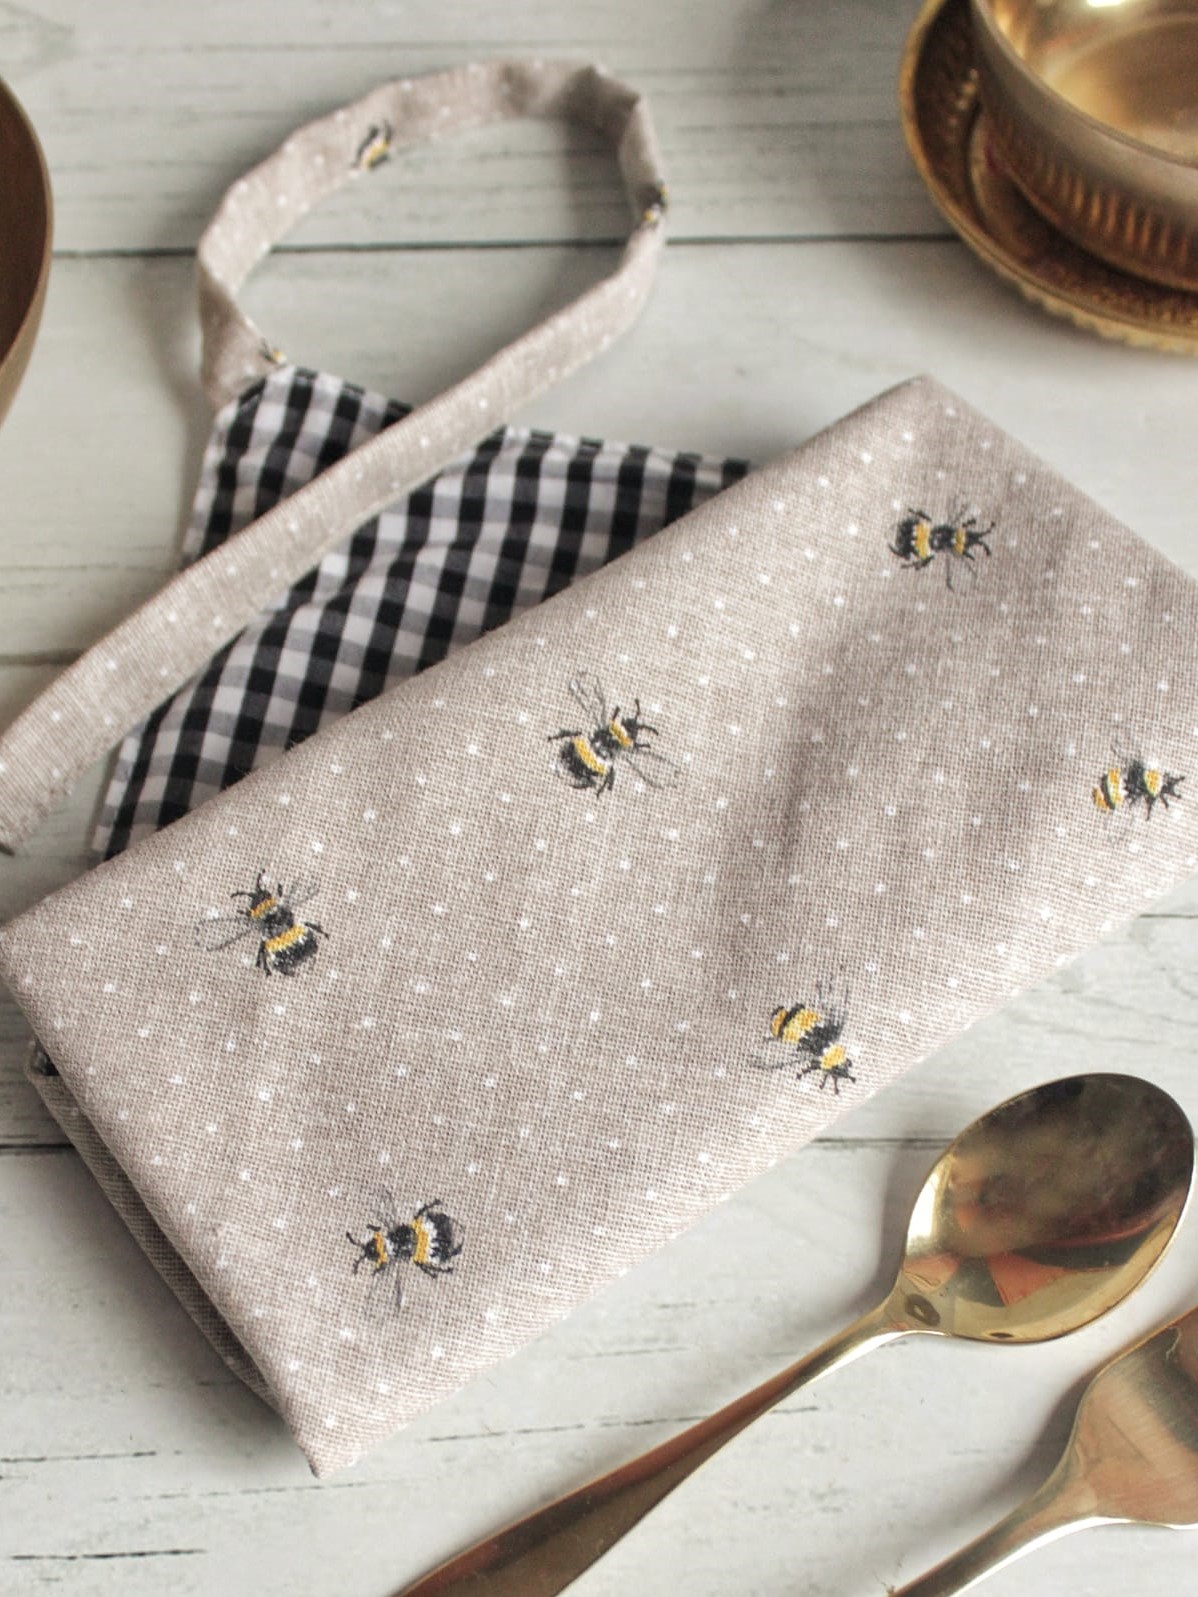 Cutlery Wrap / Cutlery Carry Pouch - Reversible - Black gingham and bee themed